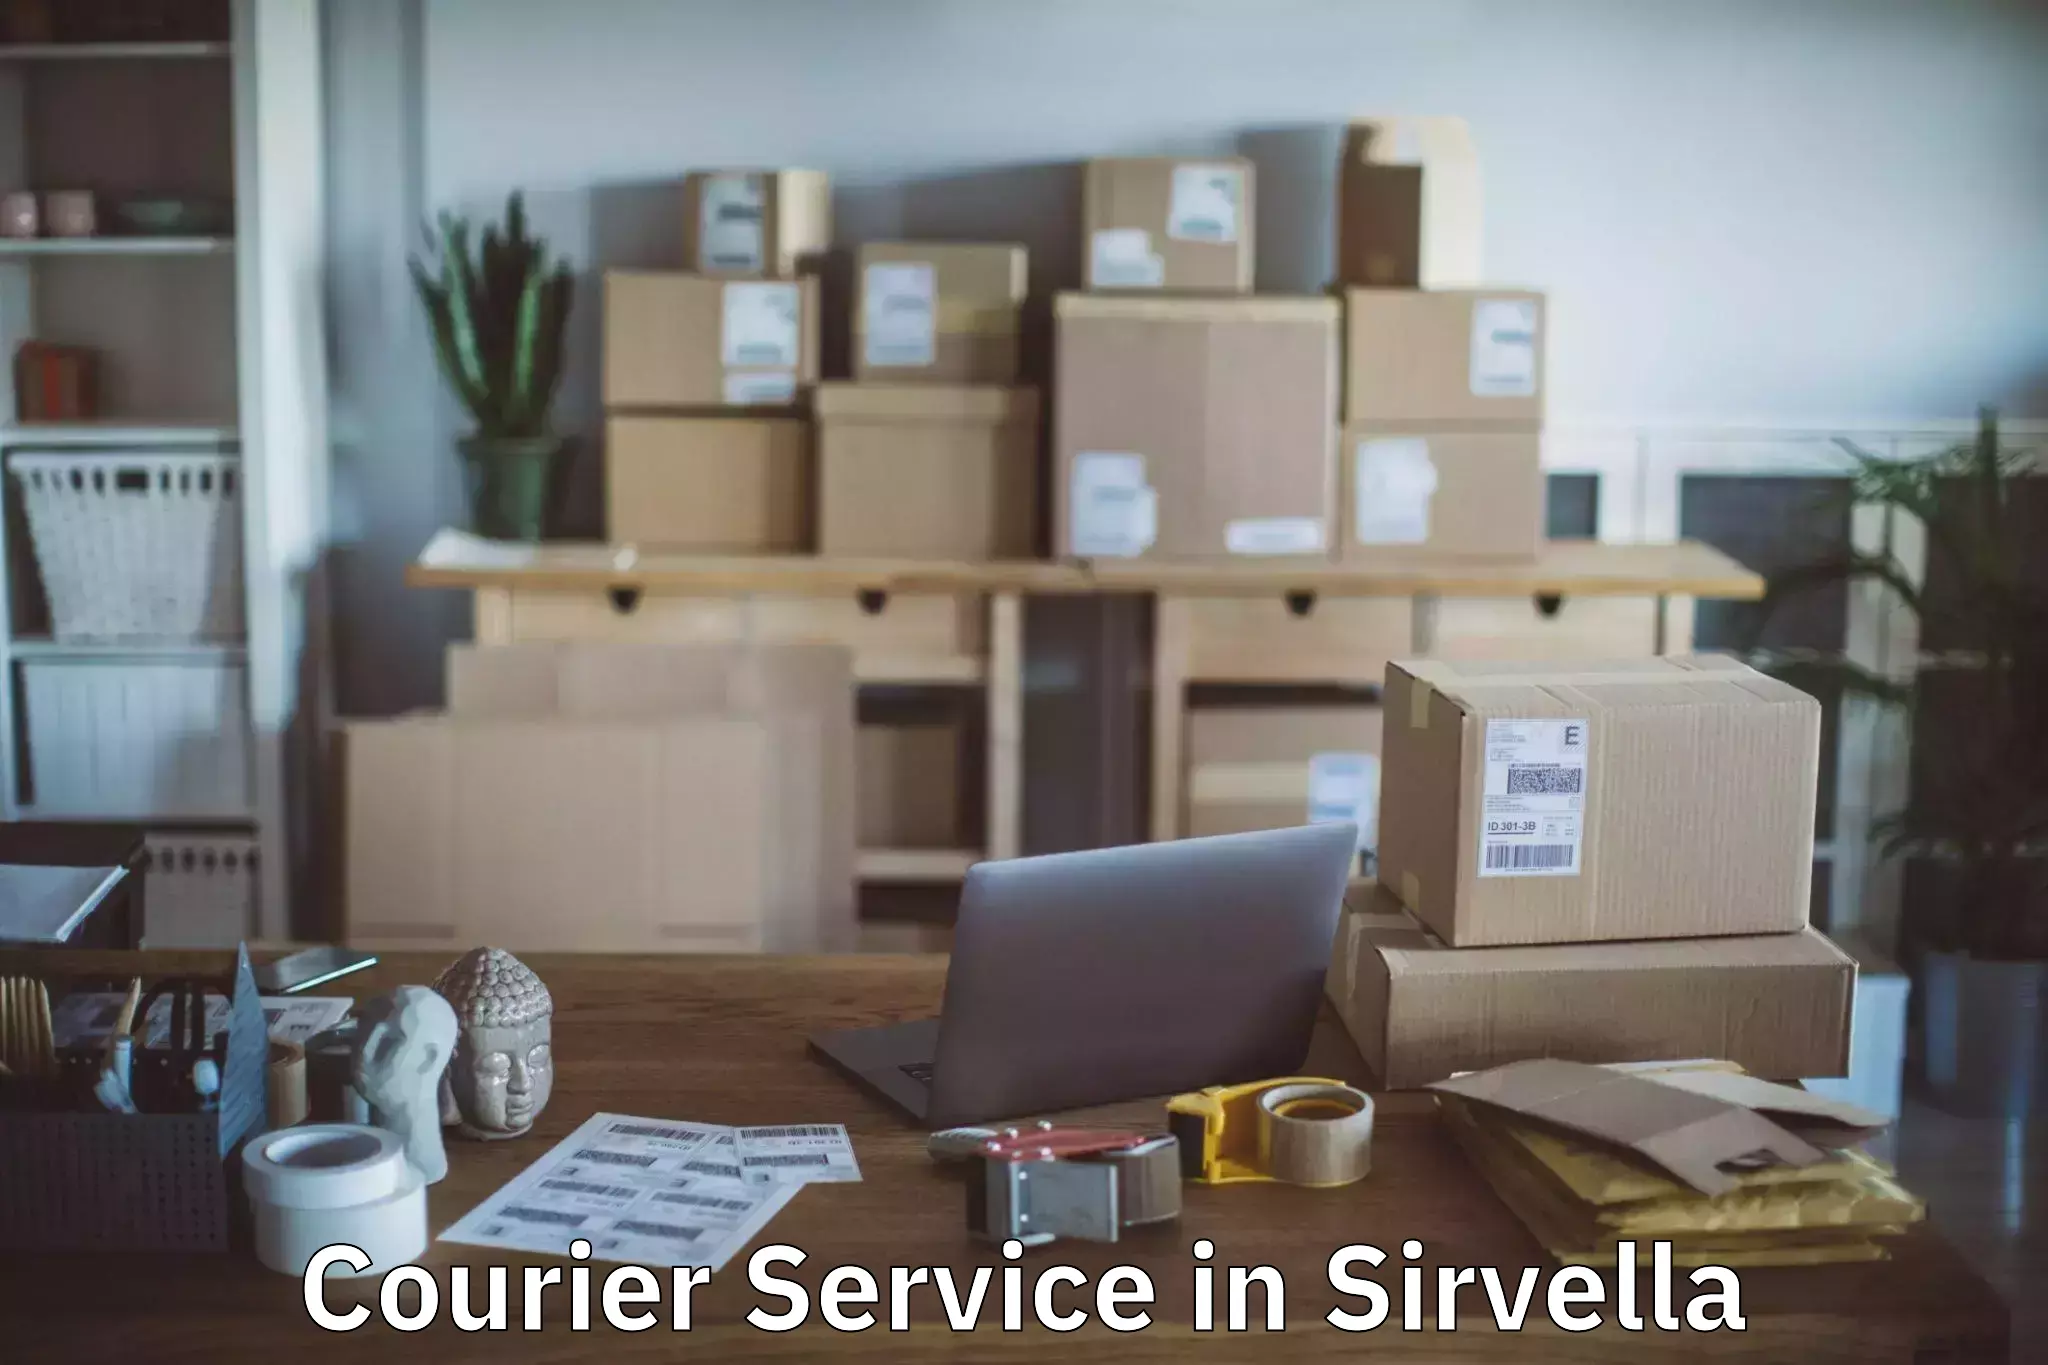 Overnight delivery in Sirvella